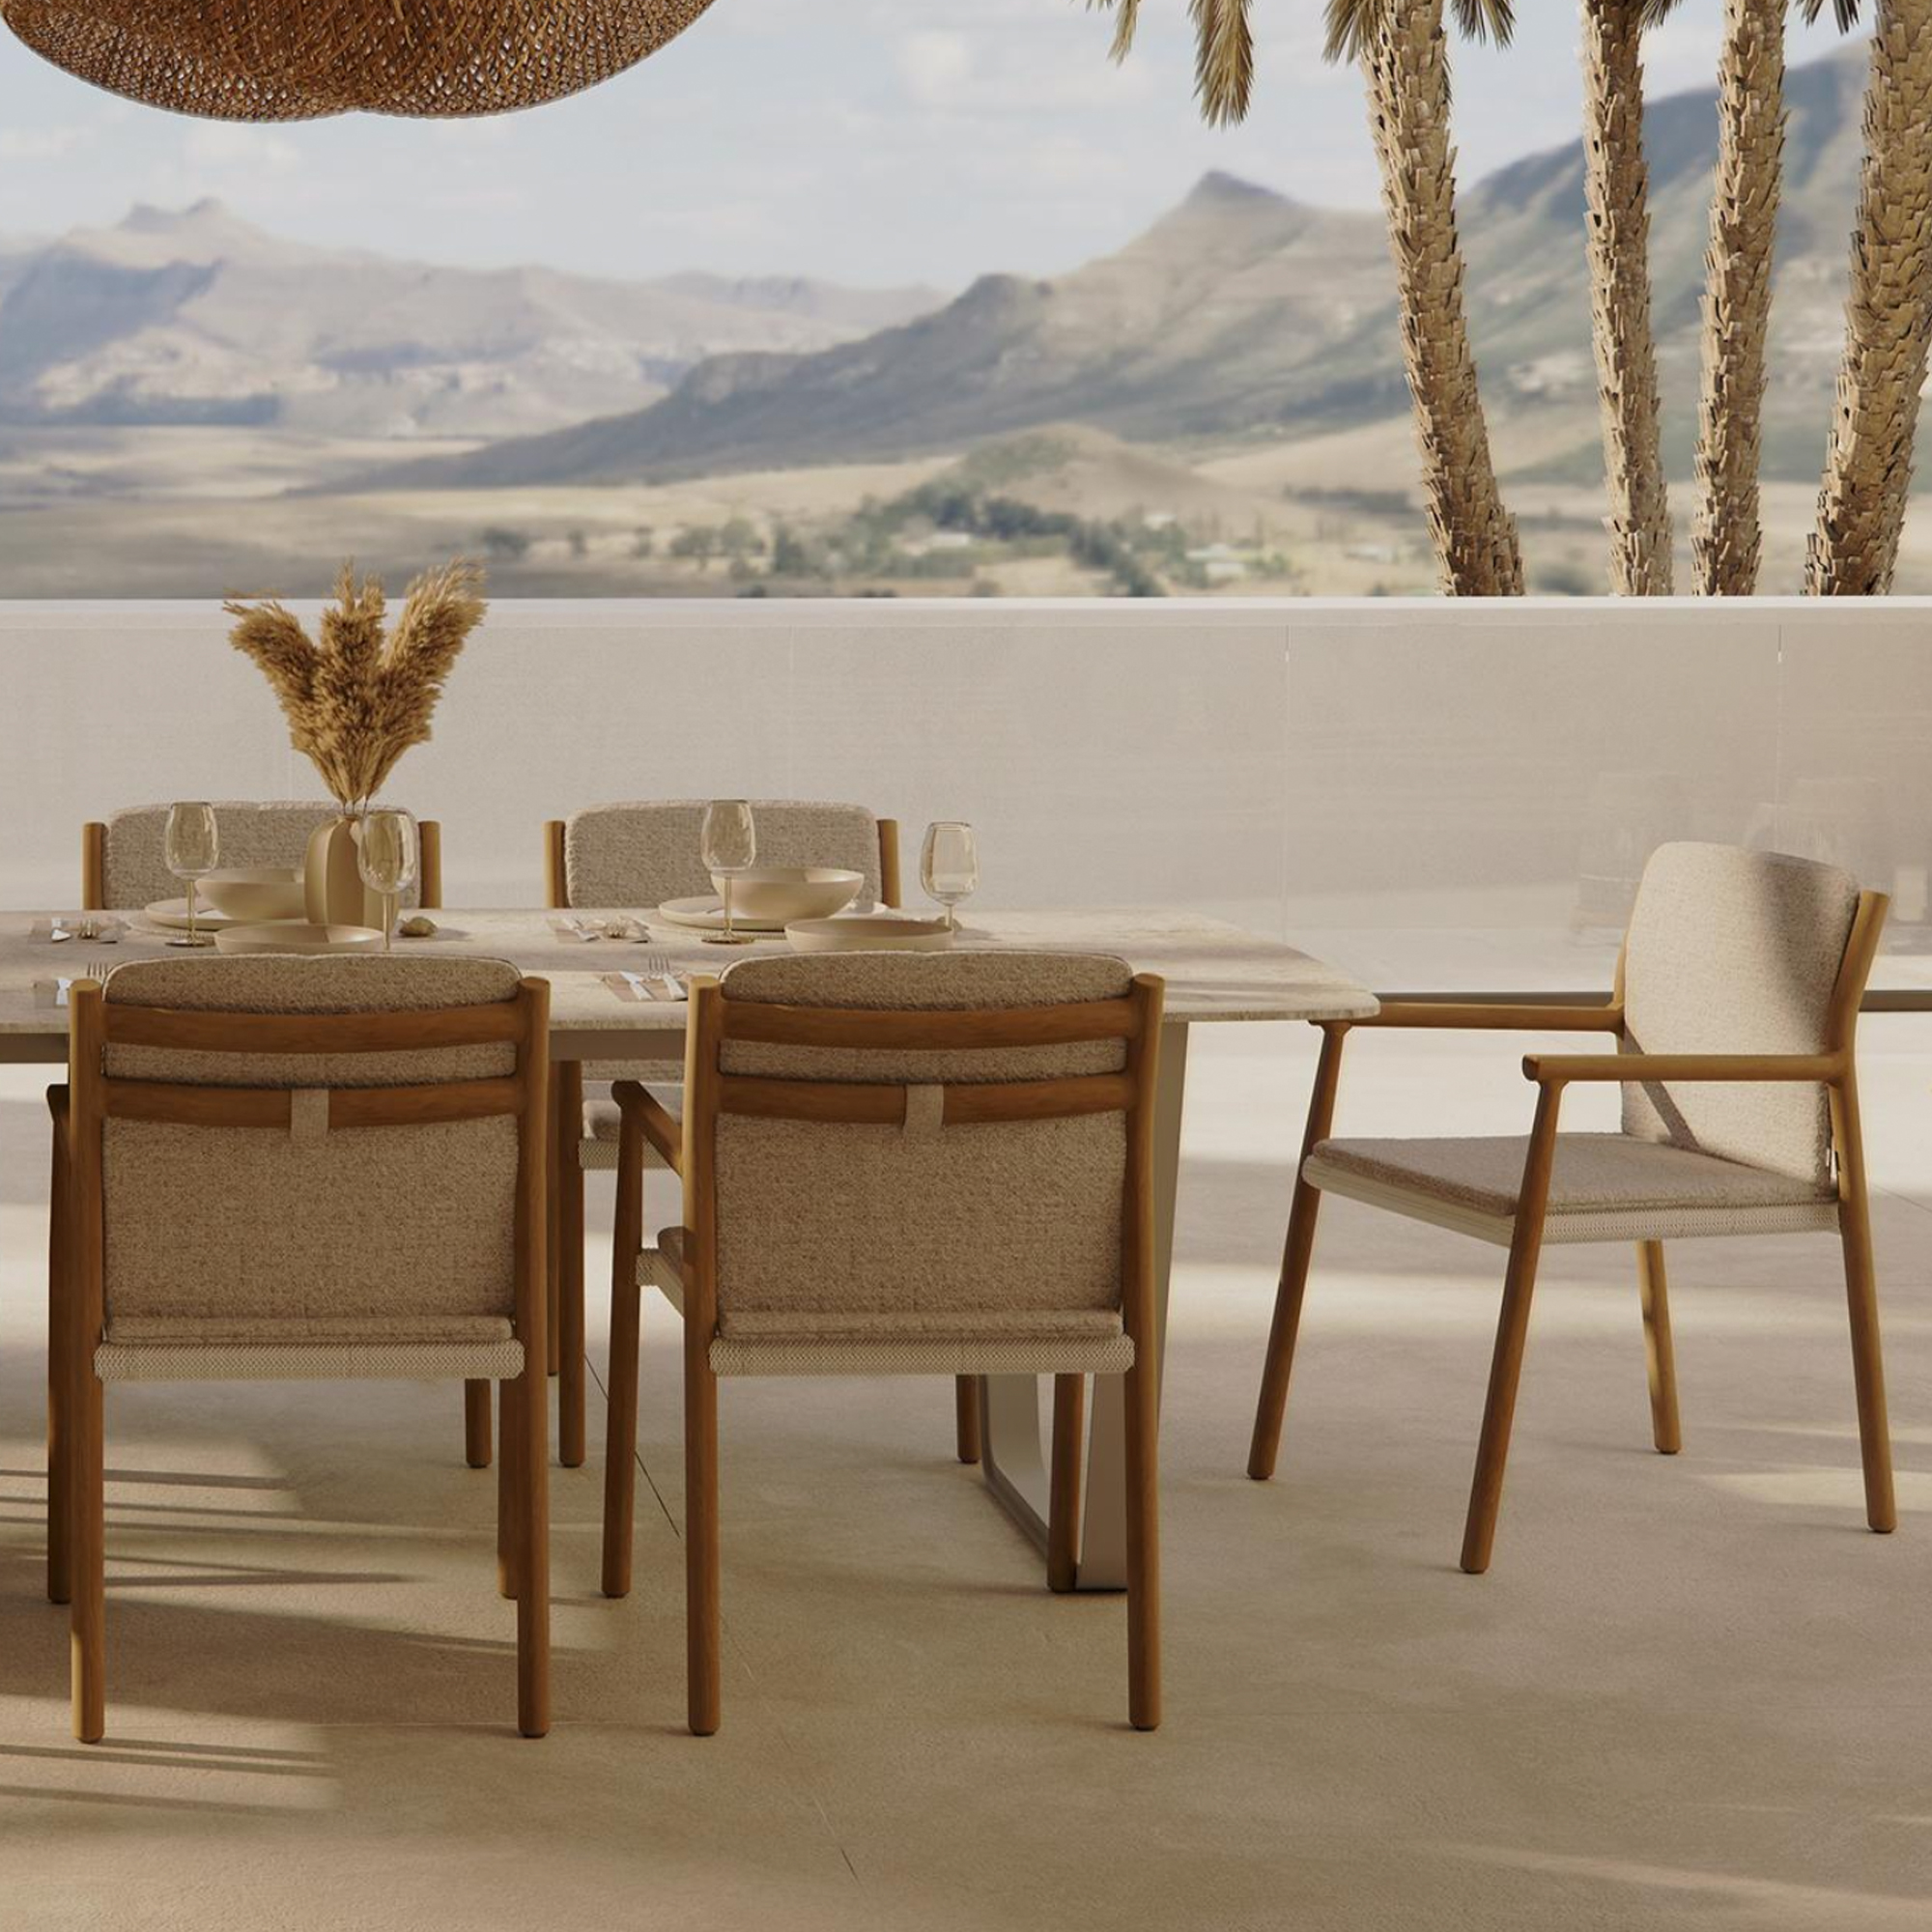 Contemporary Outdoor Dining Set With Teak Chairs